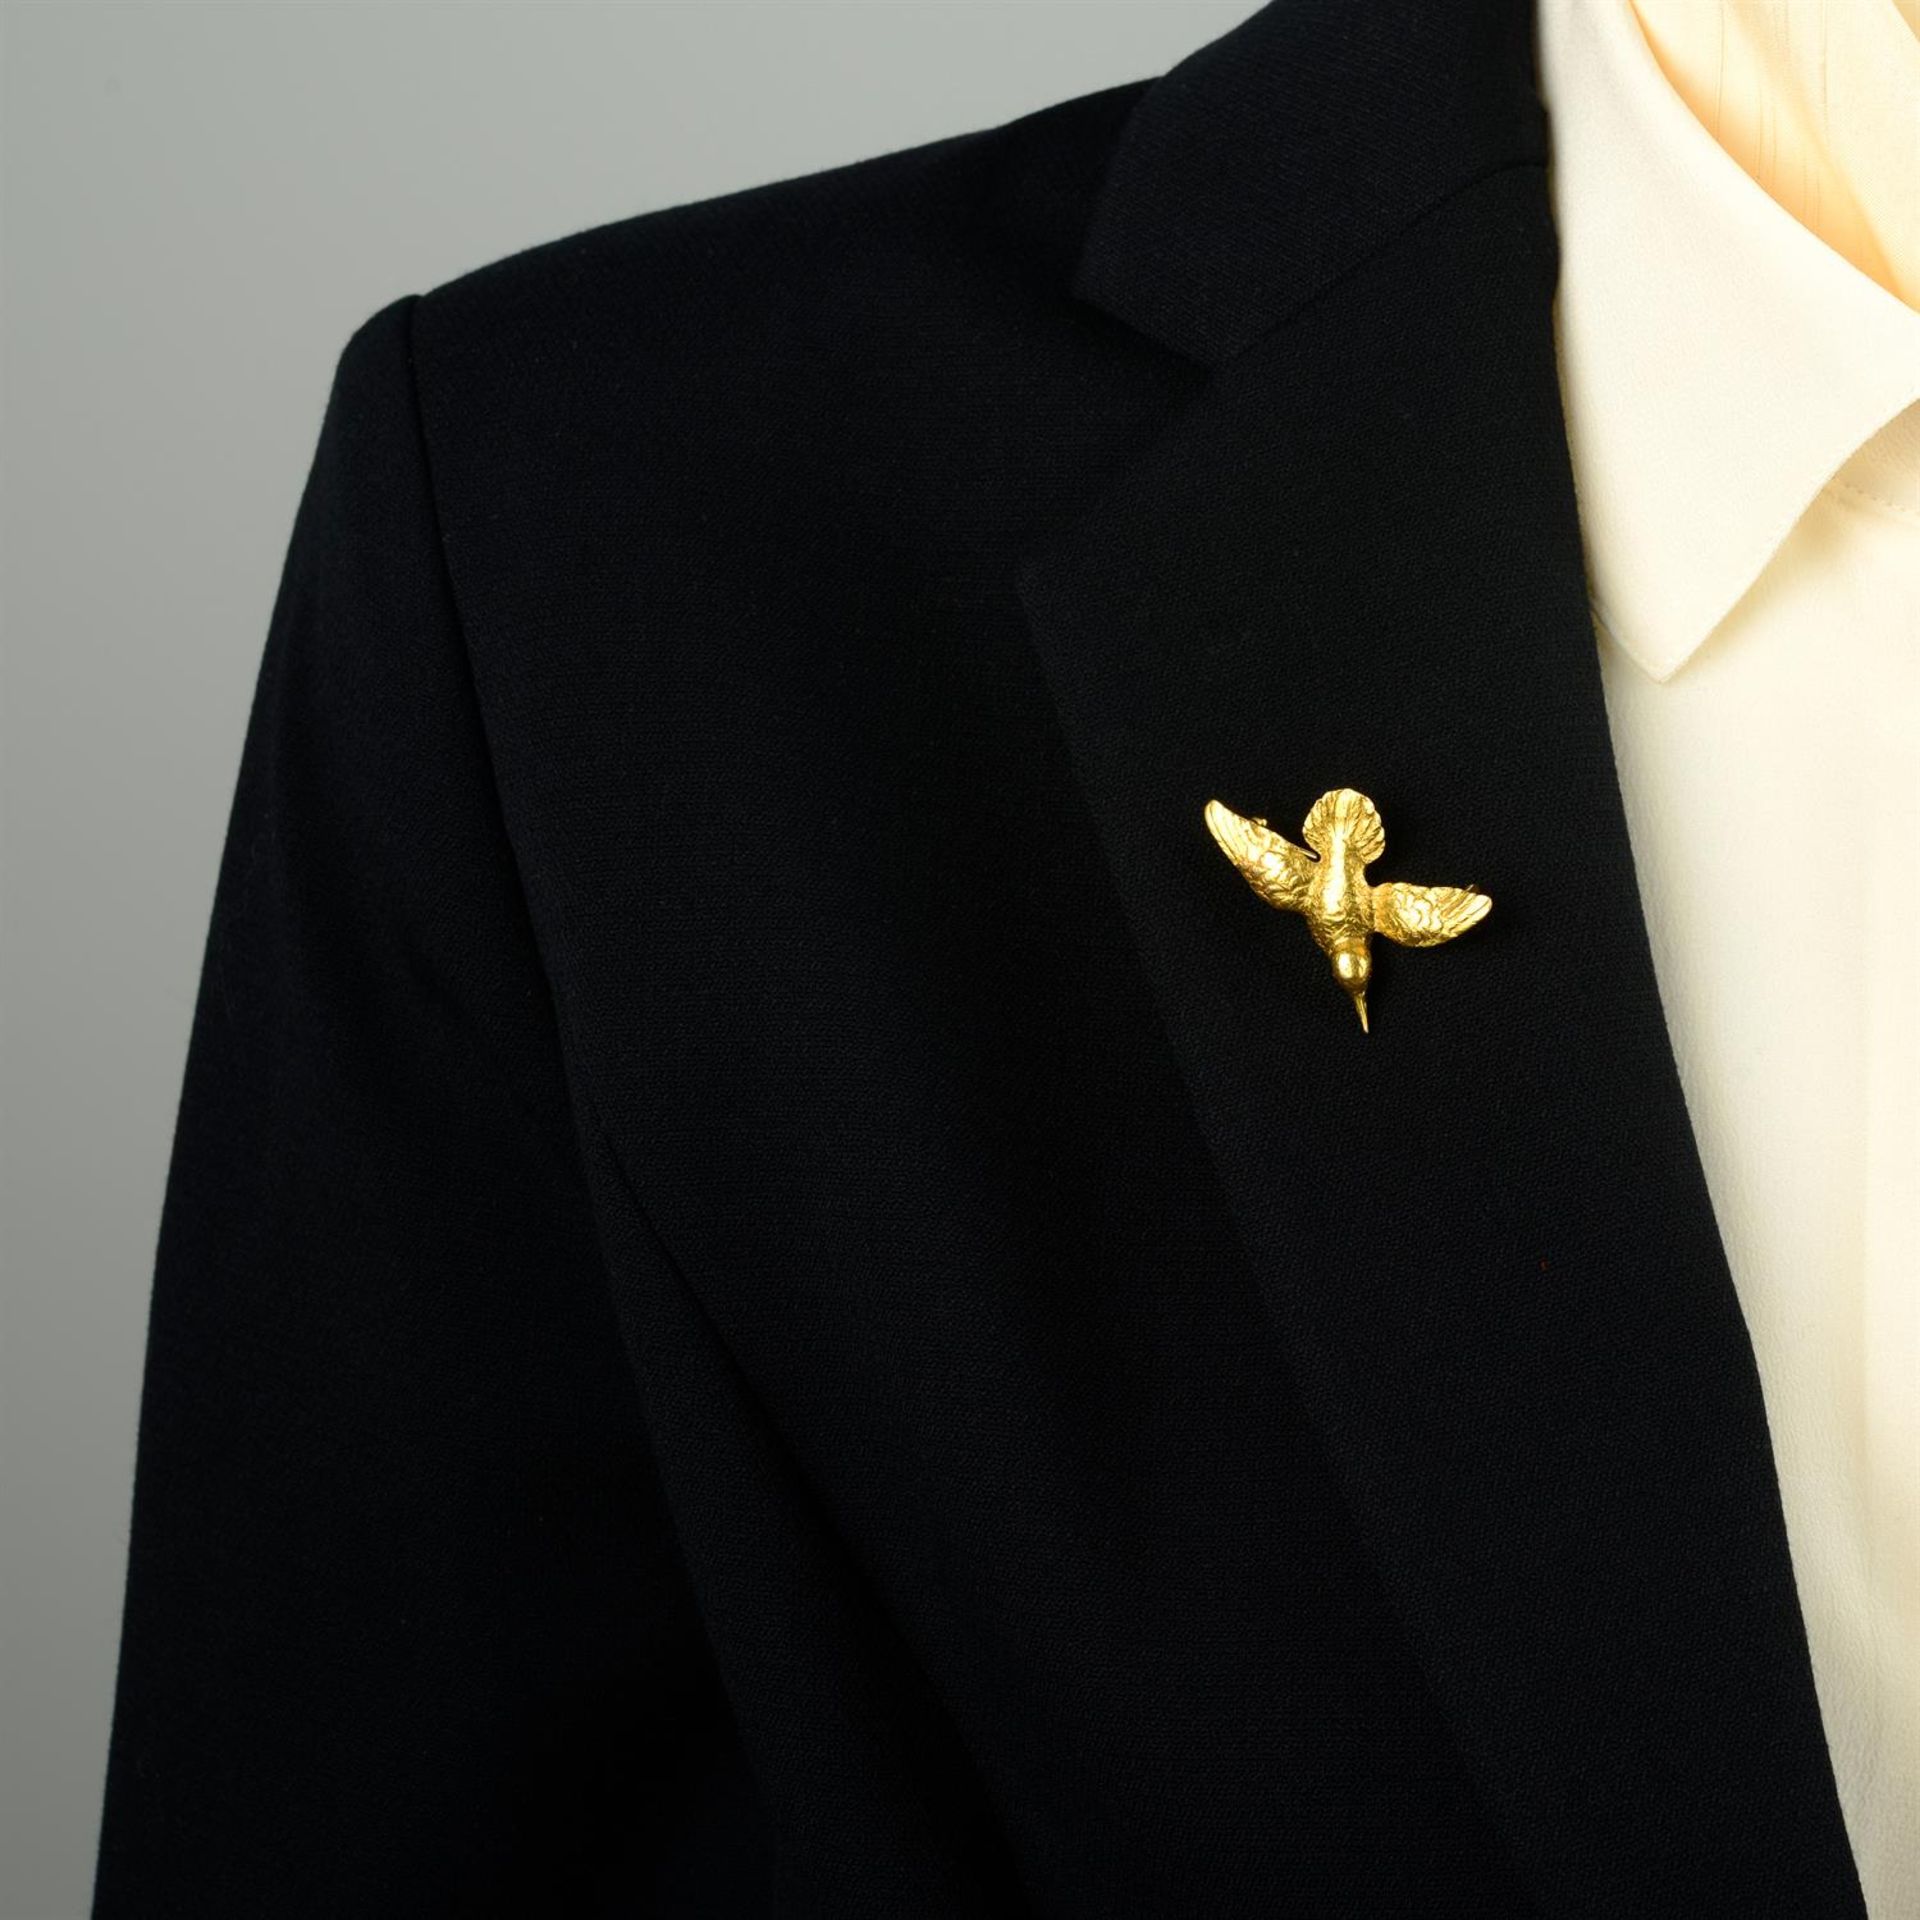 An early 20th century gold bird brooch, possibly a hummingbird, with ruby eyes. - Image 4 of 4